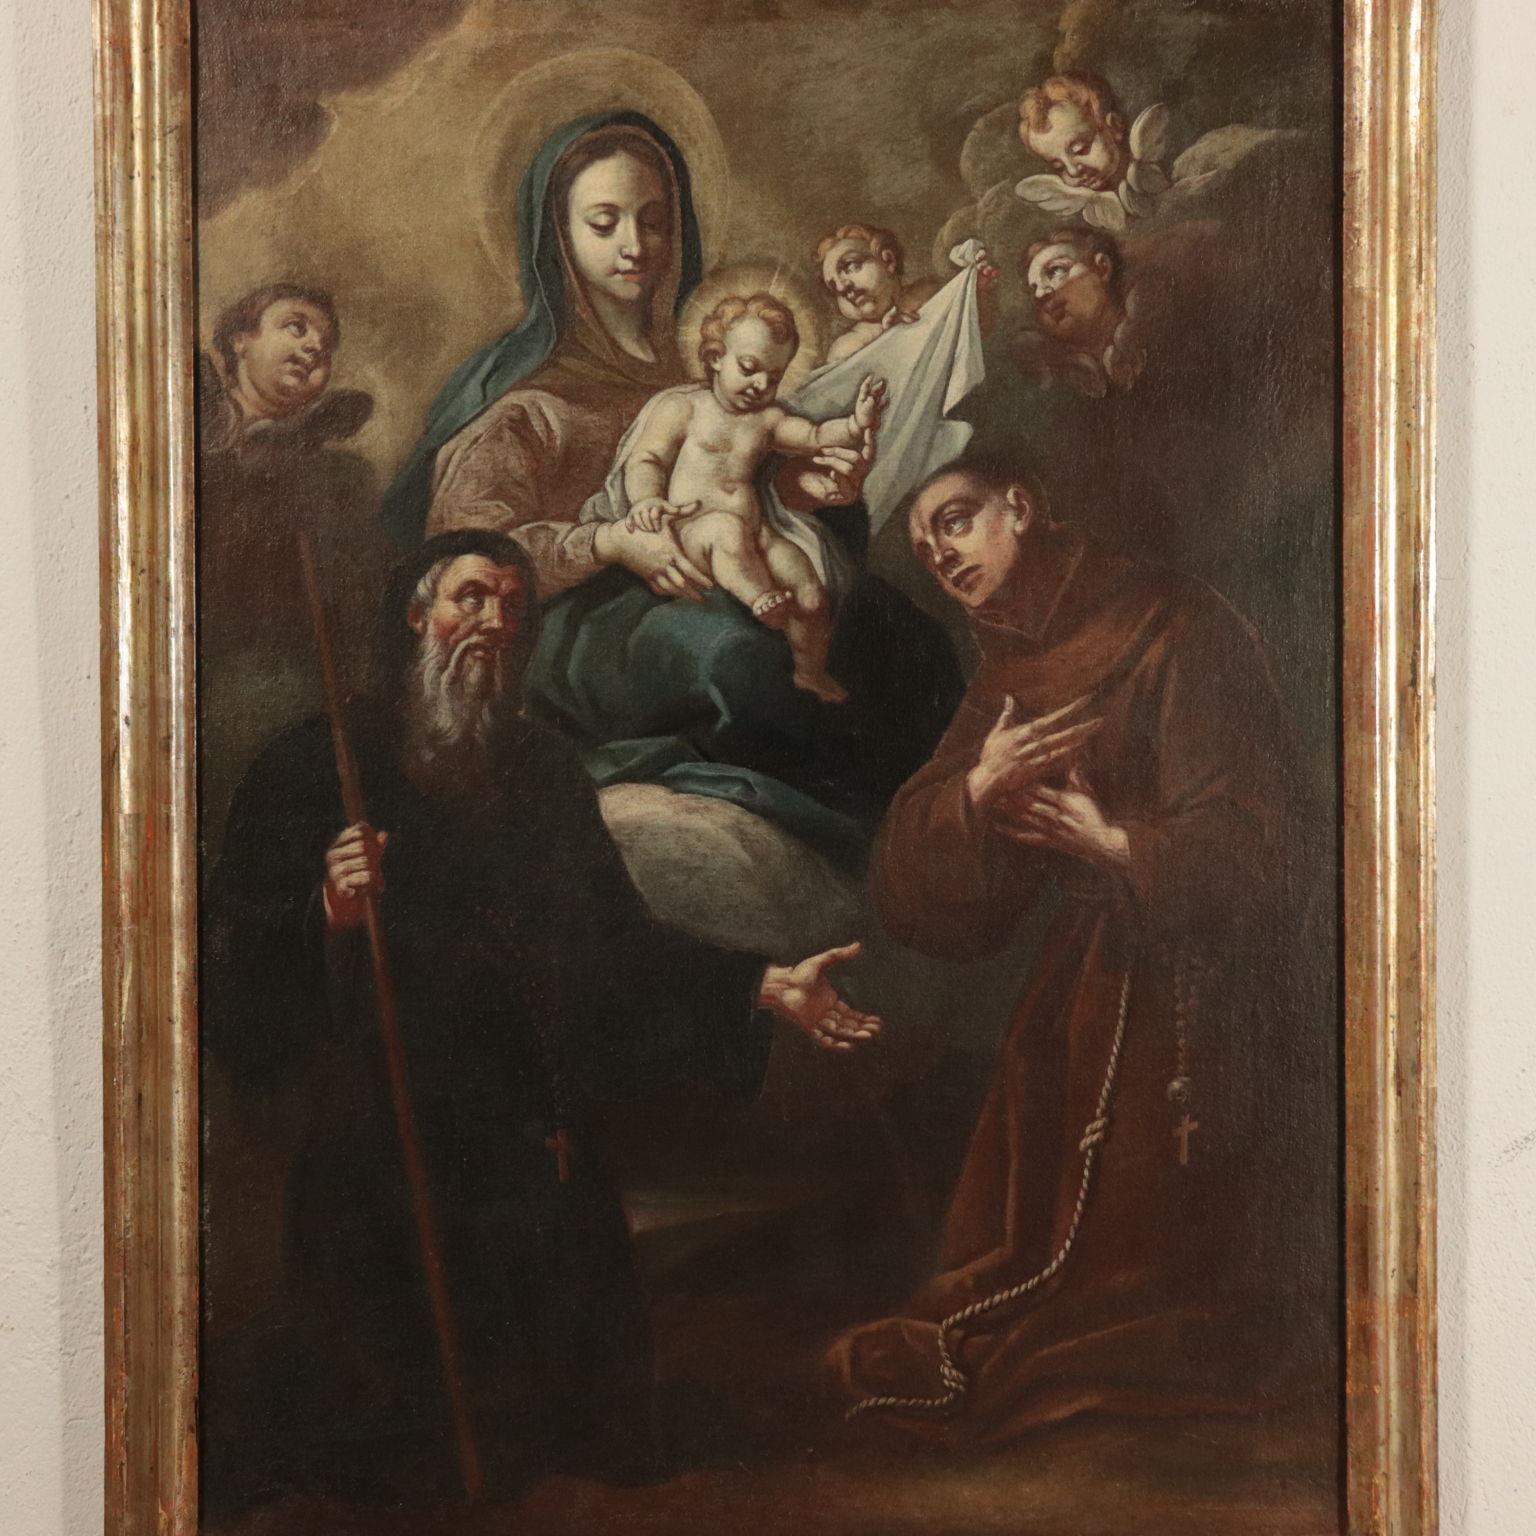 Virgin Mary with Baby Jesus on Throne between two Saints, 17th Century - Other Art Style Painting by Unknown